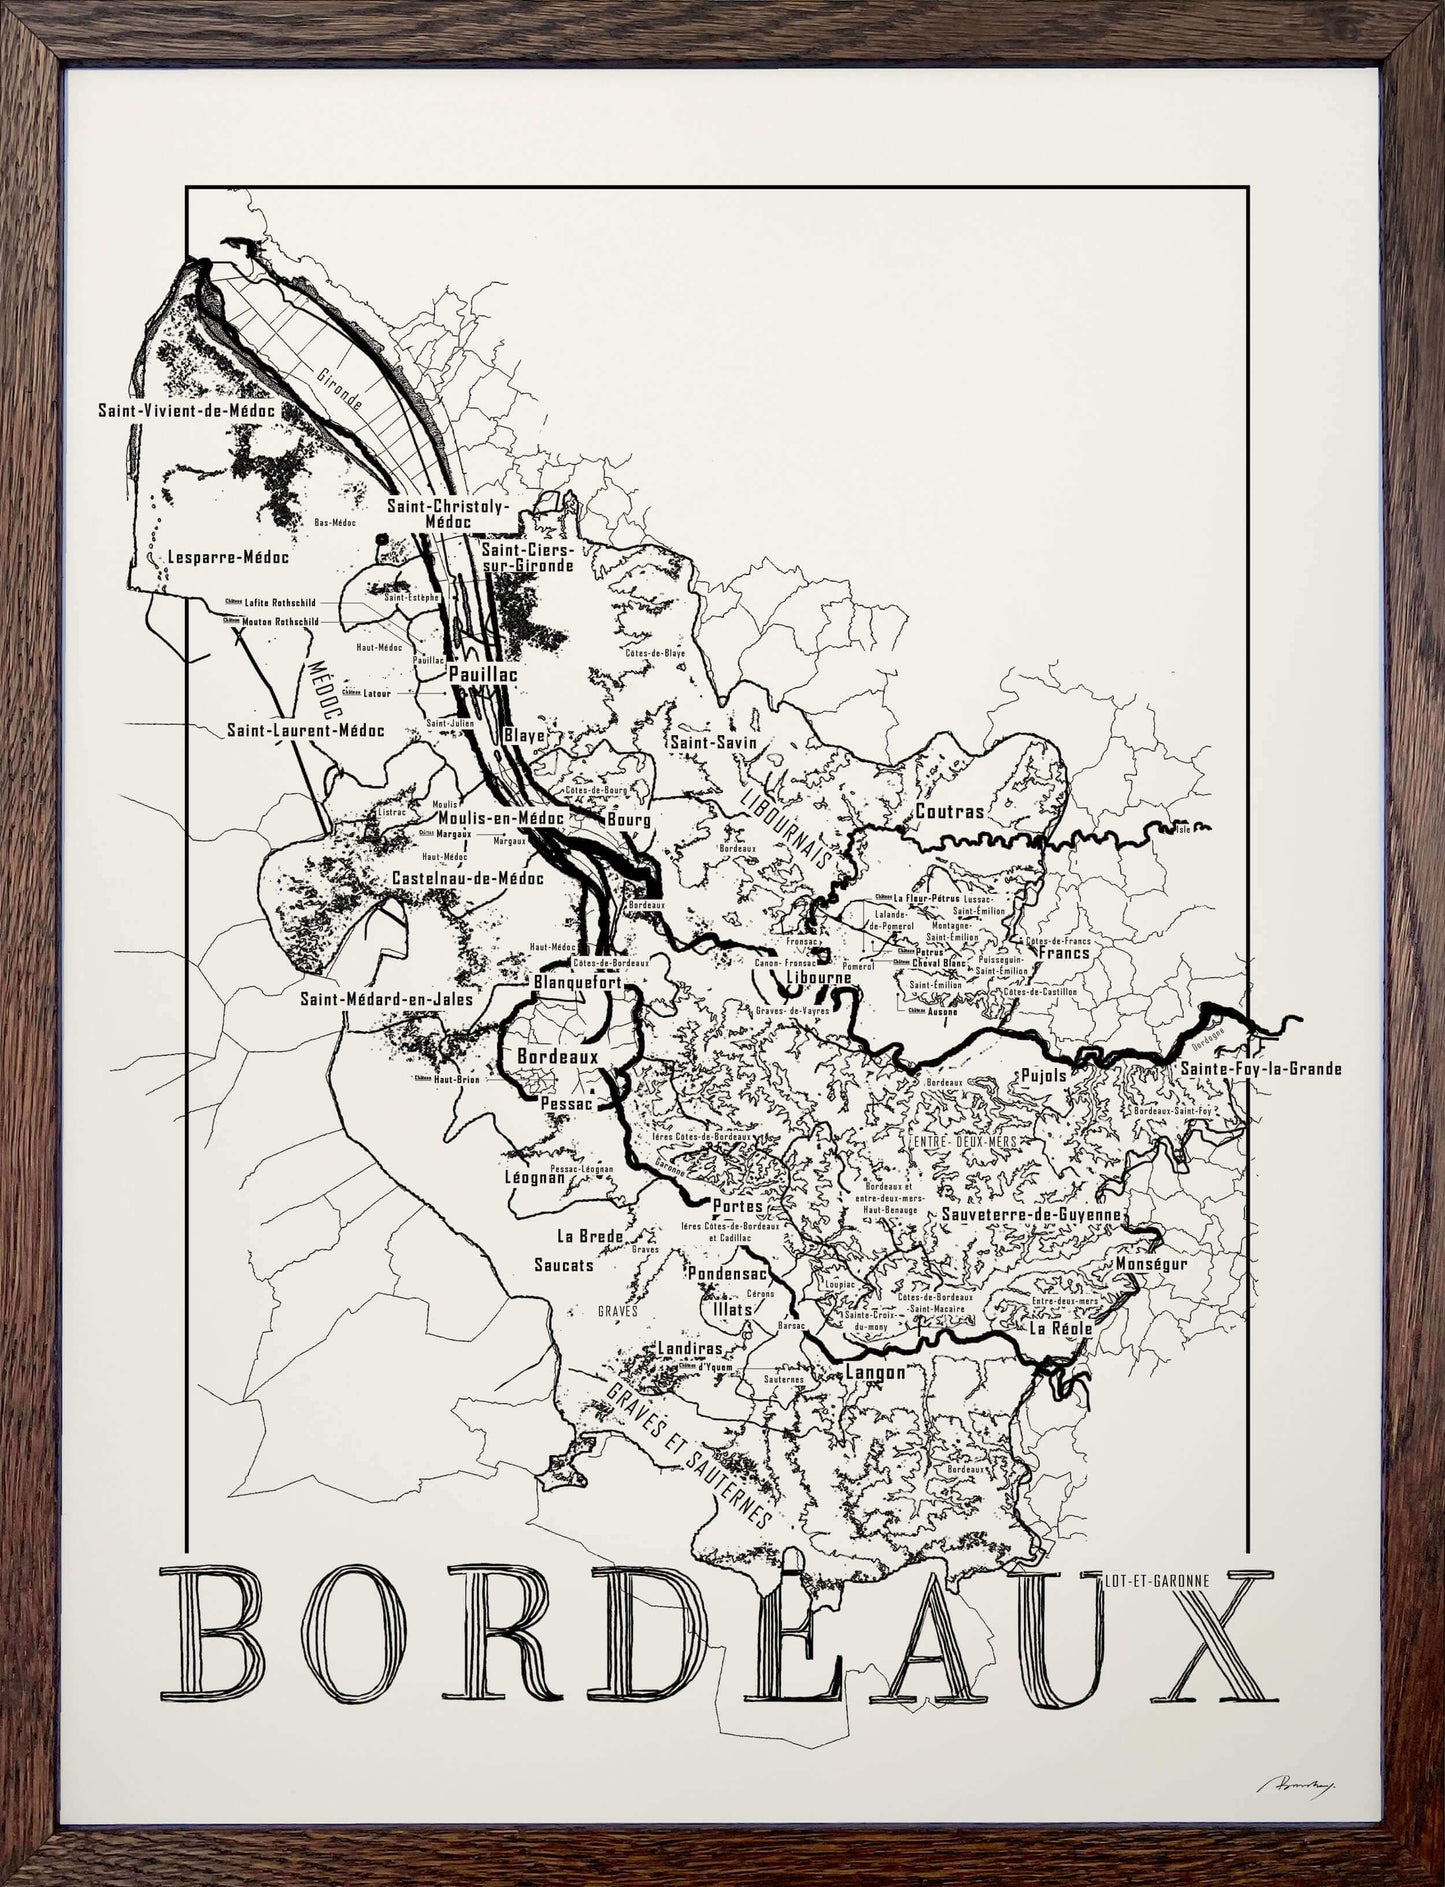 Bordeaux Wine map poster. Wine art. Wine print. Wine poster. Exclusive wine map posters. Premium quality wine maps printed on environmentally friendly FSC marked paper. 